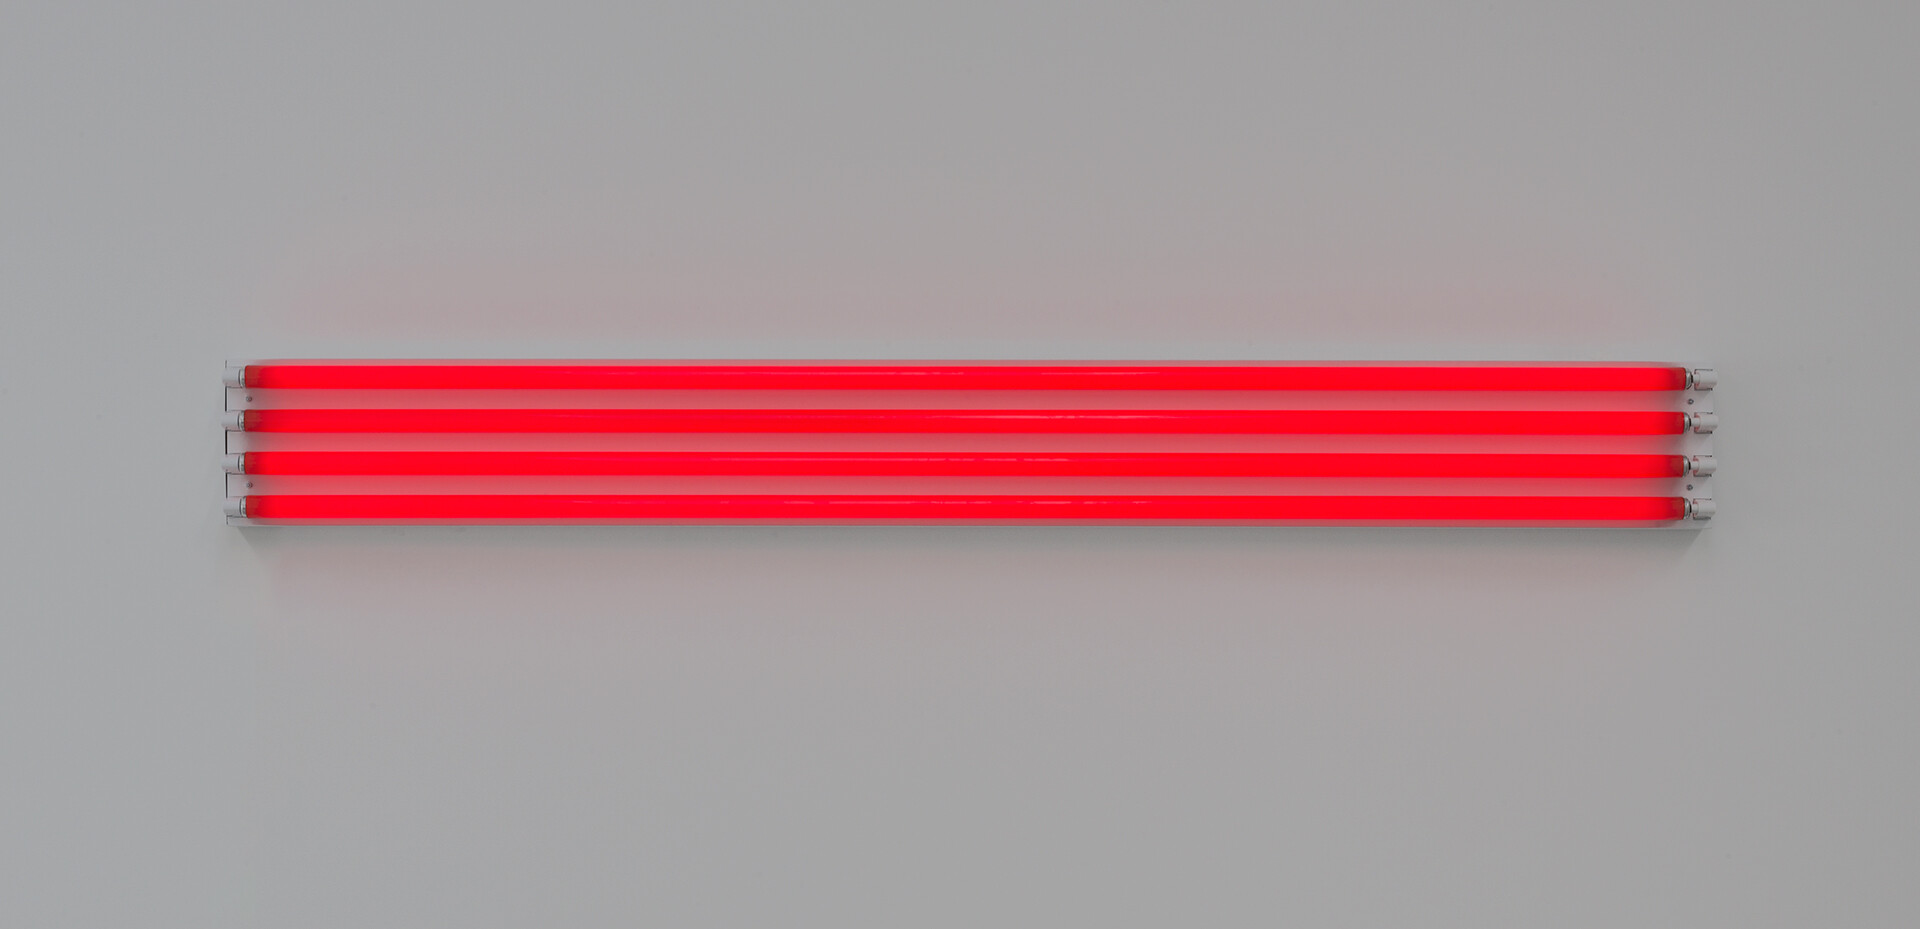 A sculpture by Dan Flavin, titled four red horizontals (to Sonja), dated 1963.